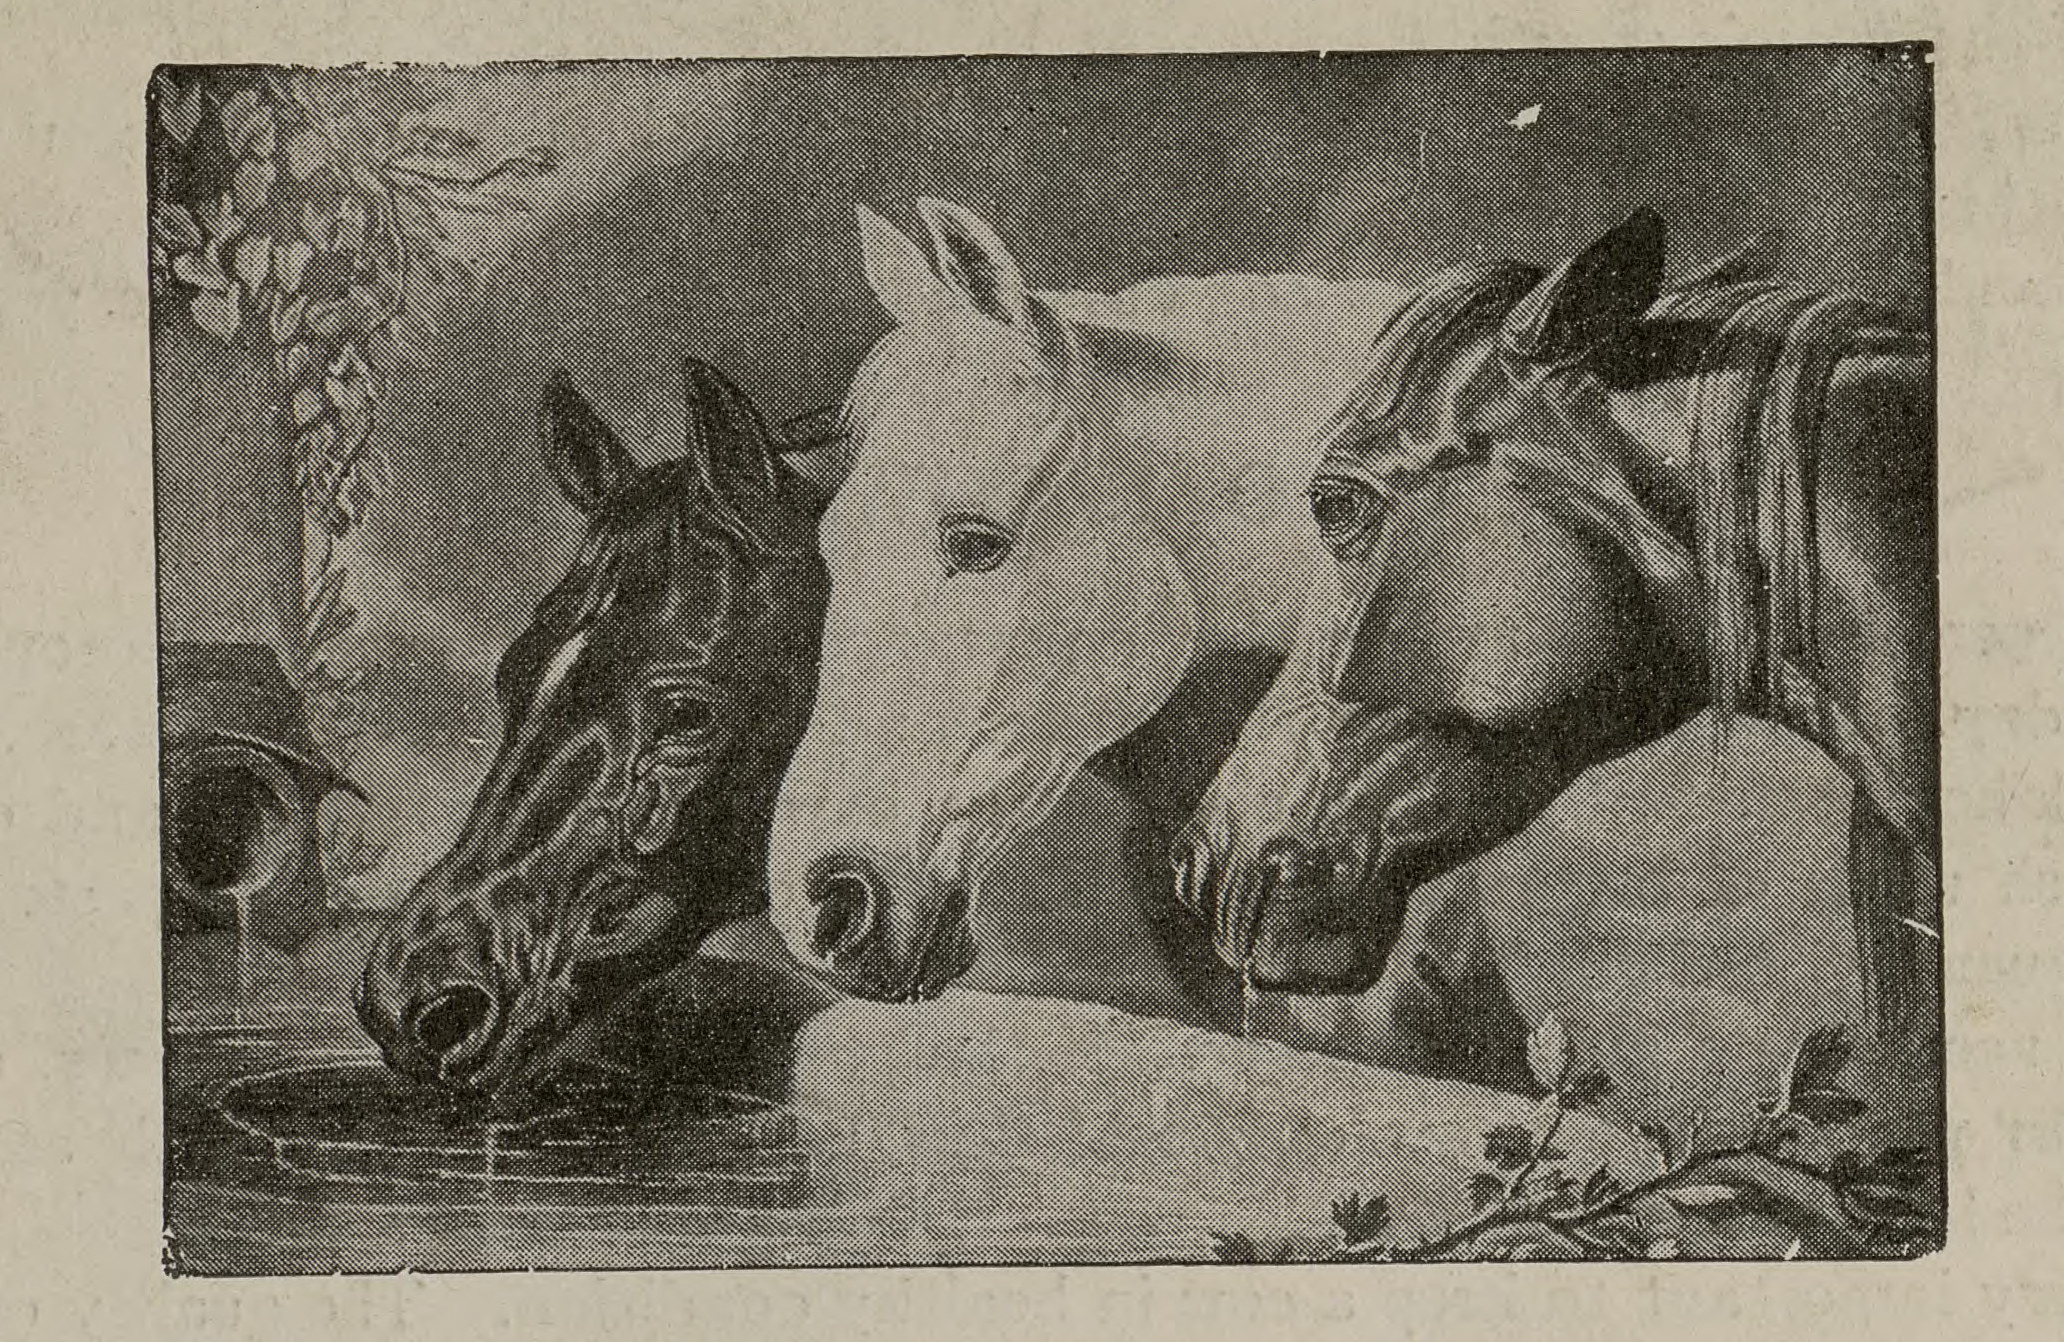 Horses from "Ways of Kindness," which was intended to teach children about ways to be kind to animals in their daily lives. From the John Ptak Collection of Animal Rights and Animal Welfare Printed Education Materials.